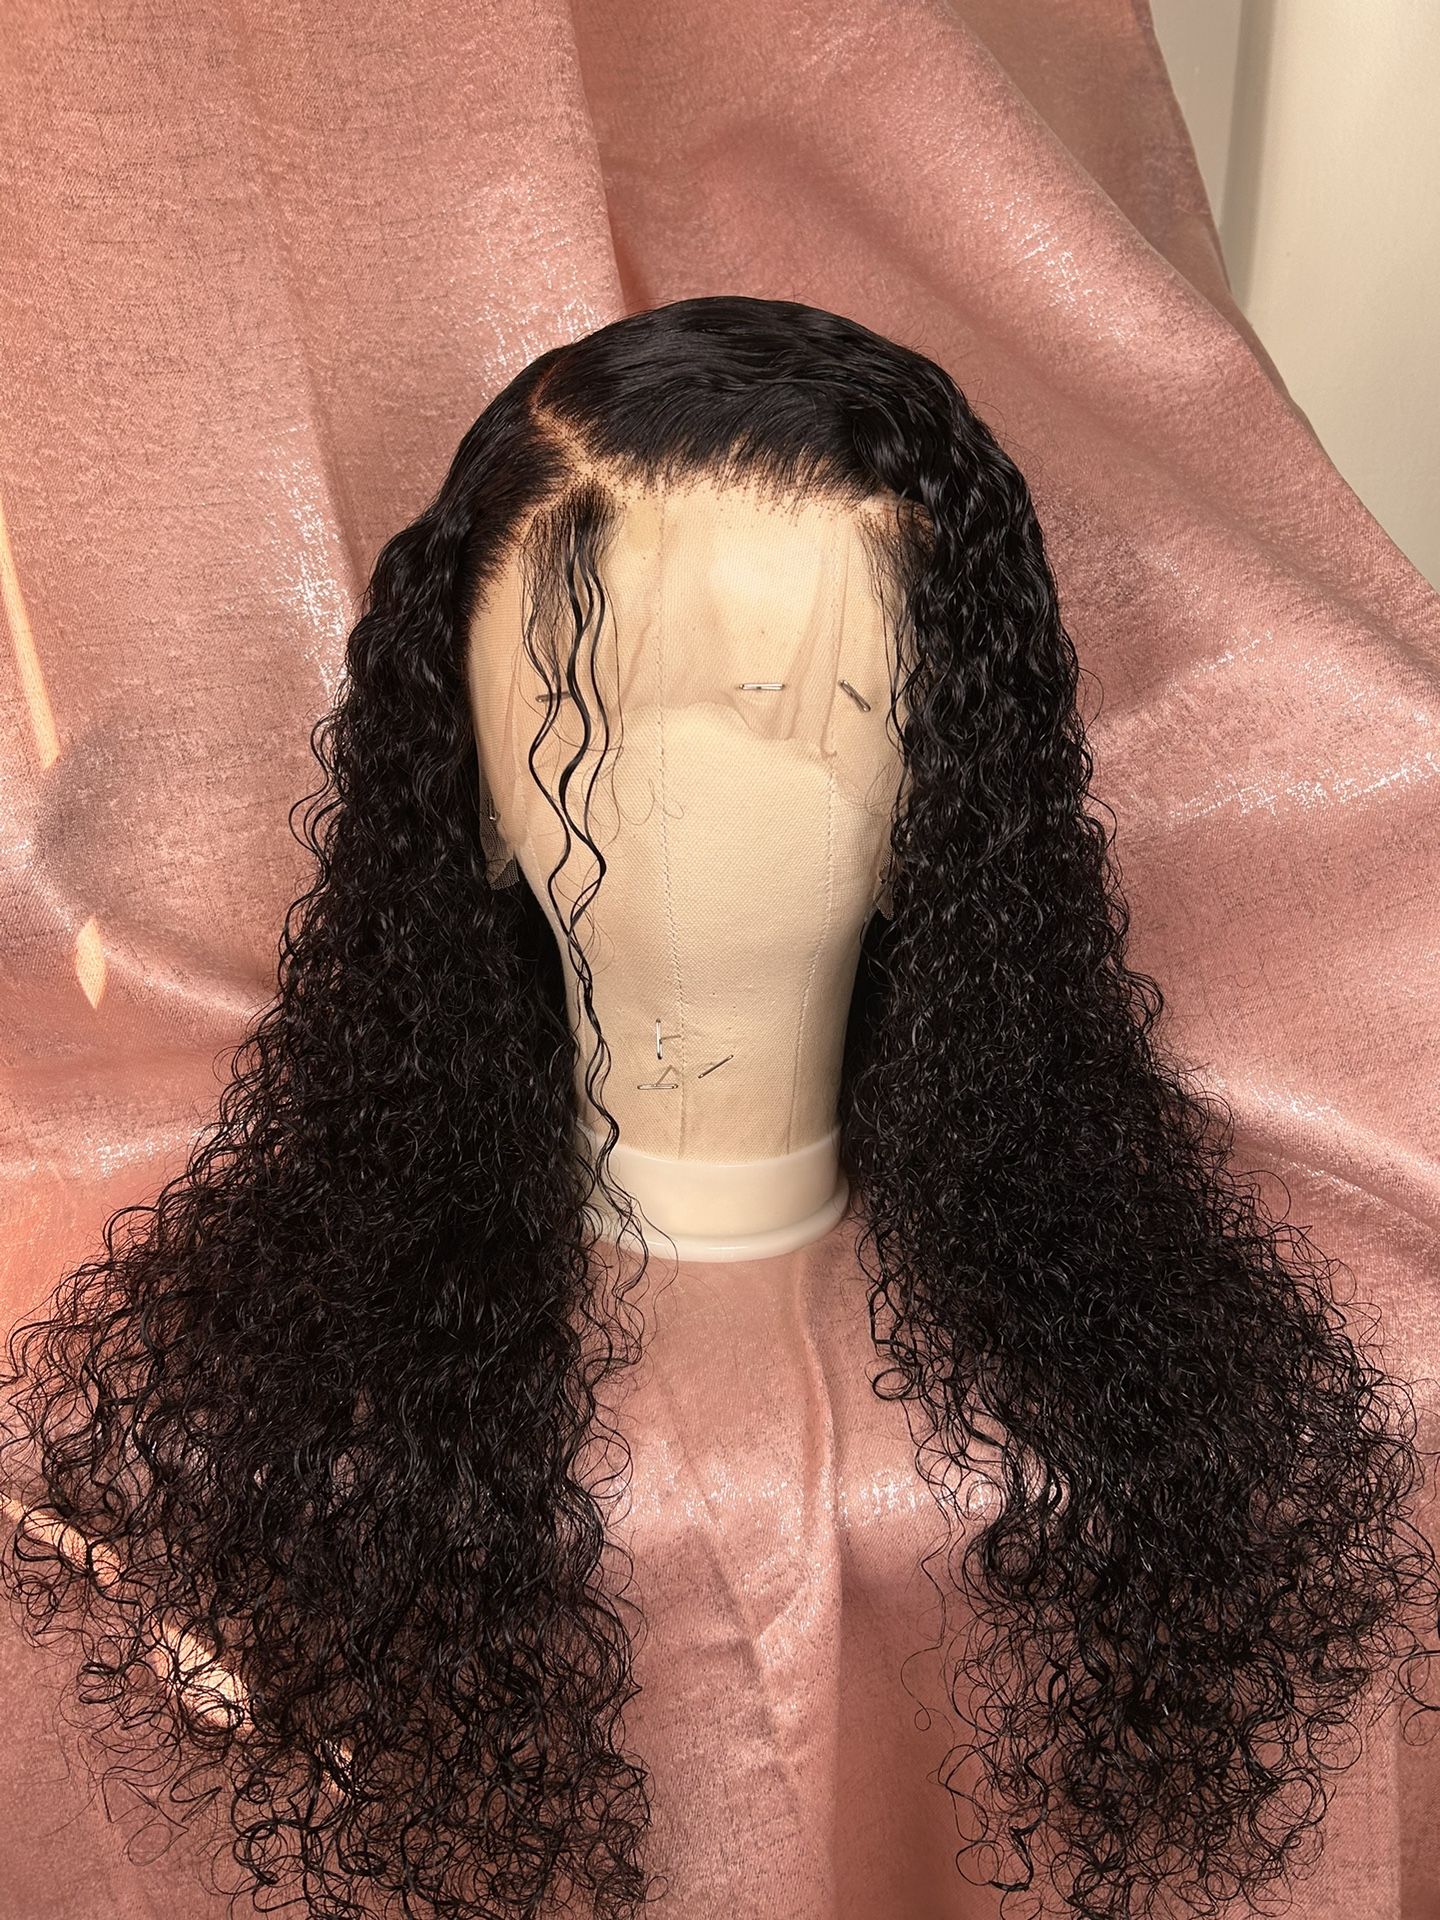 Curly Human Hair Lace Front Wig